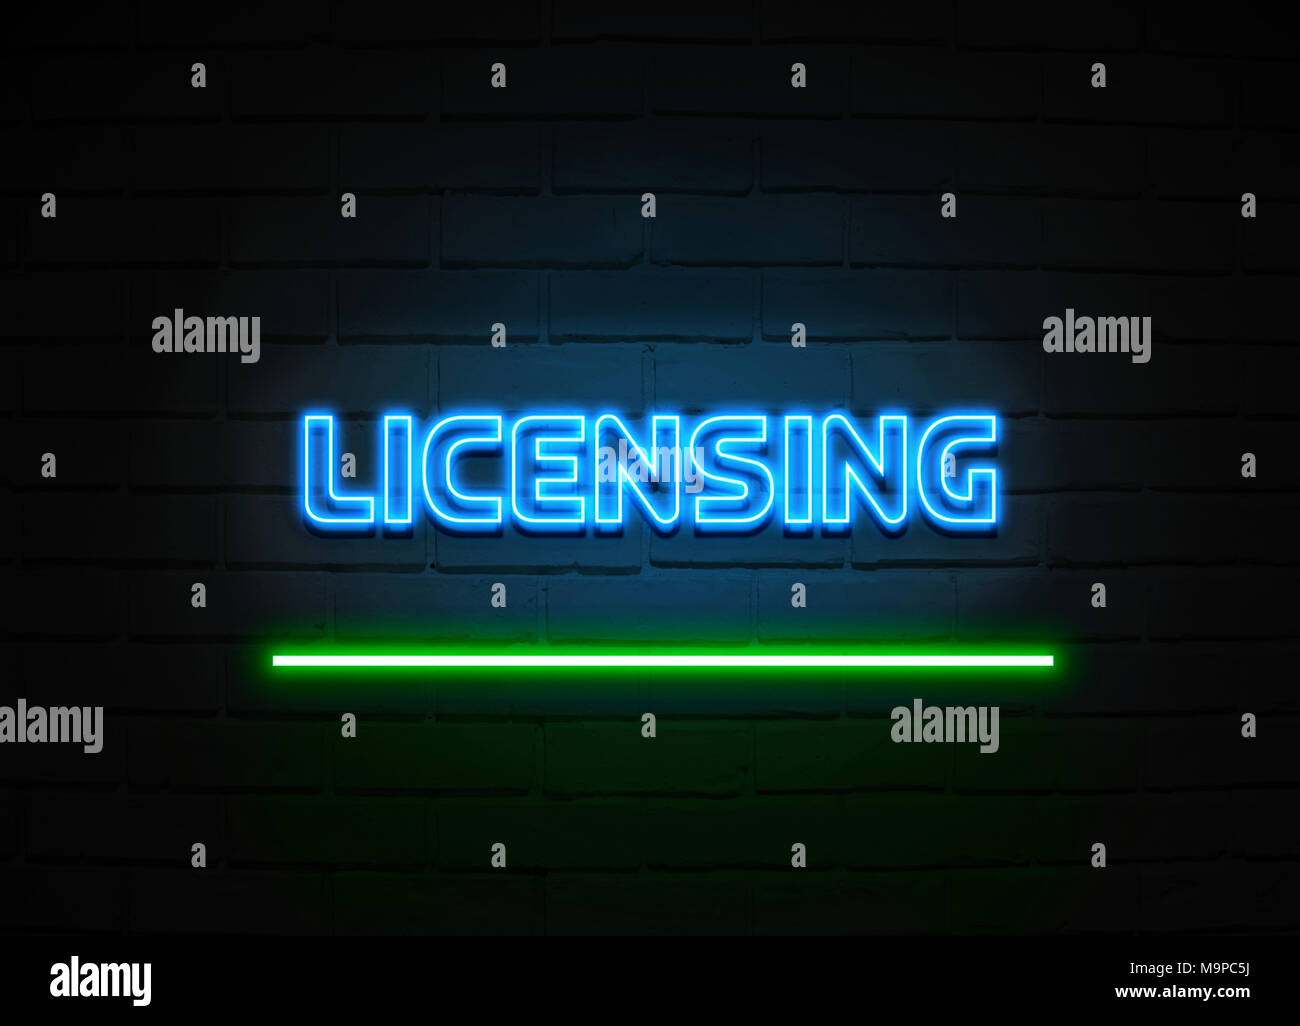 Licensing neon sign - Glowing Neon Sign on brickwall wall - 3D rendered royalty free stock illustration. Stock Photo